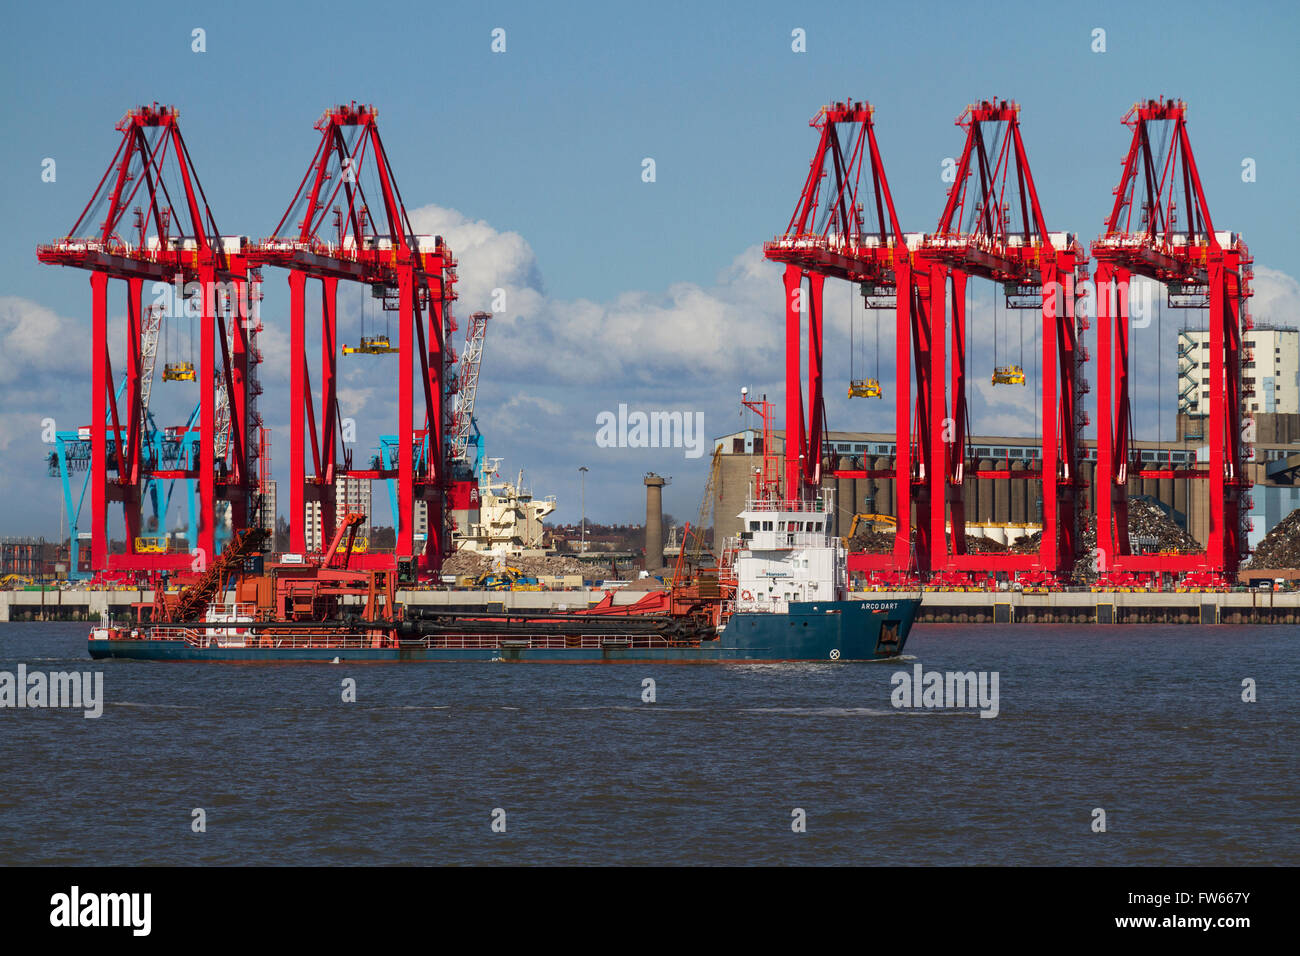 Container port operational cantilever rail-mounted gantry (CRMG) cranes and ship at Seaforth Dock, Liverpool, Wallasey, Merseyside, UK Stock Photo